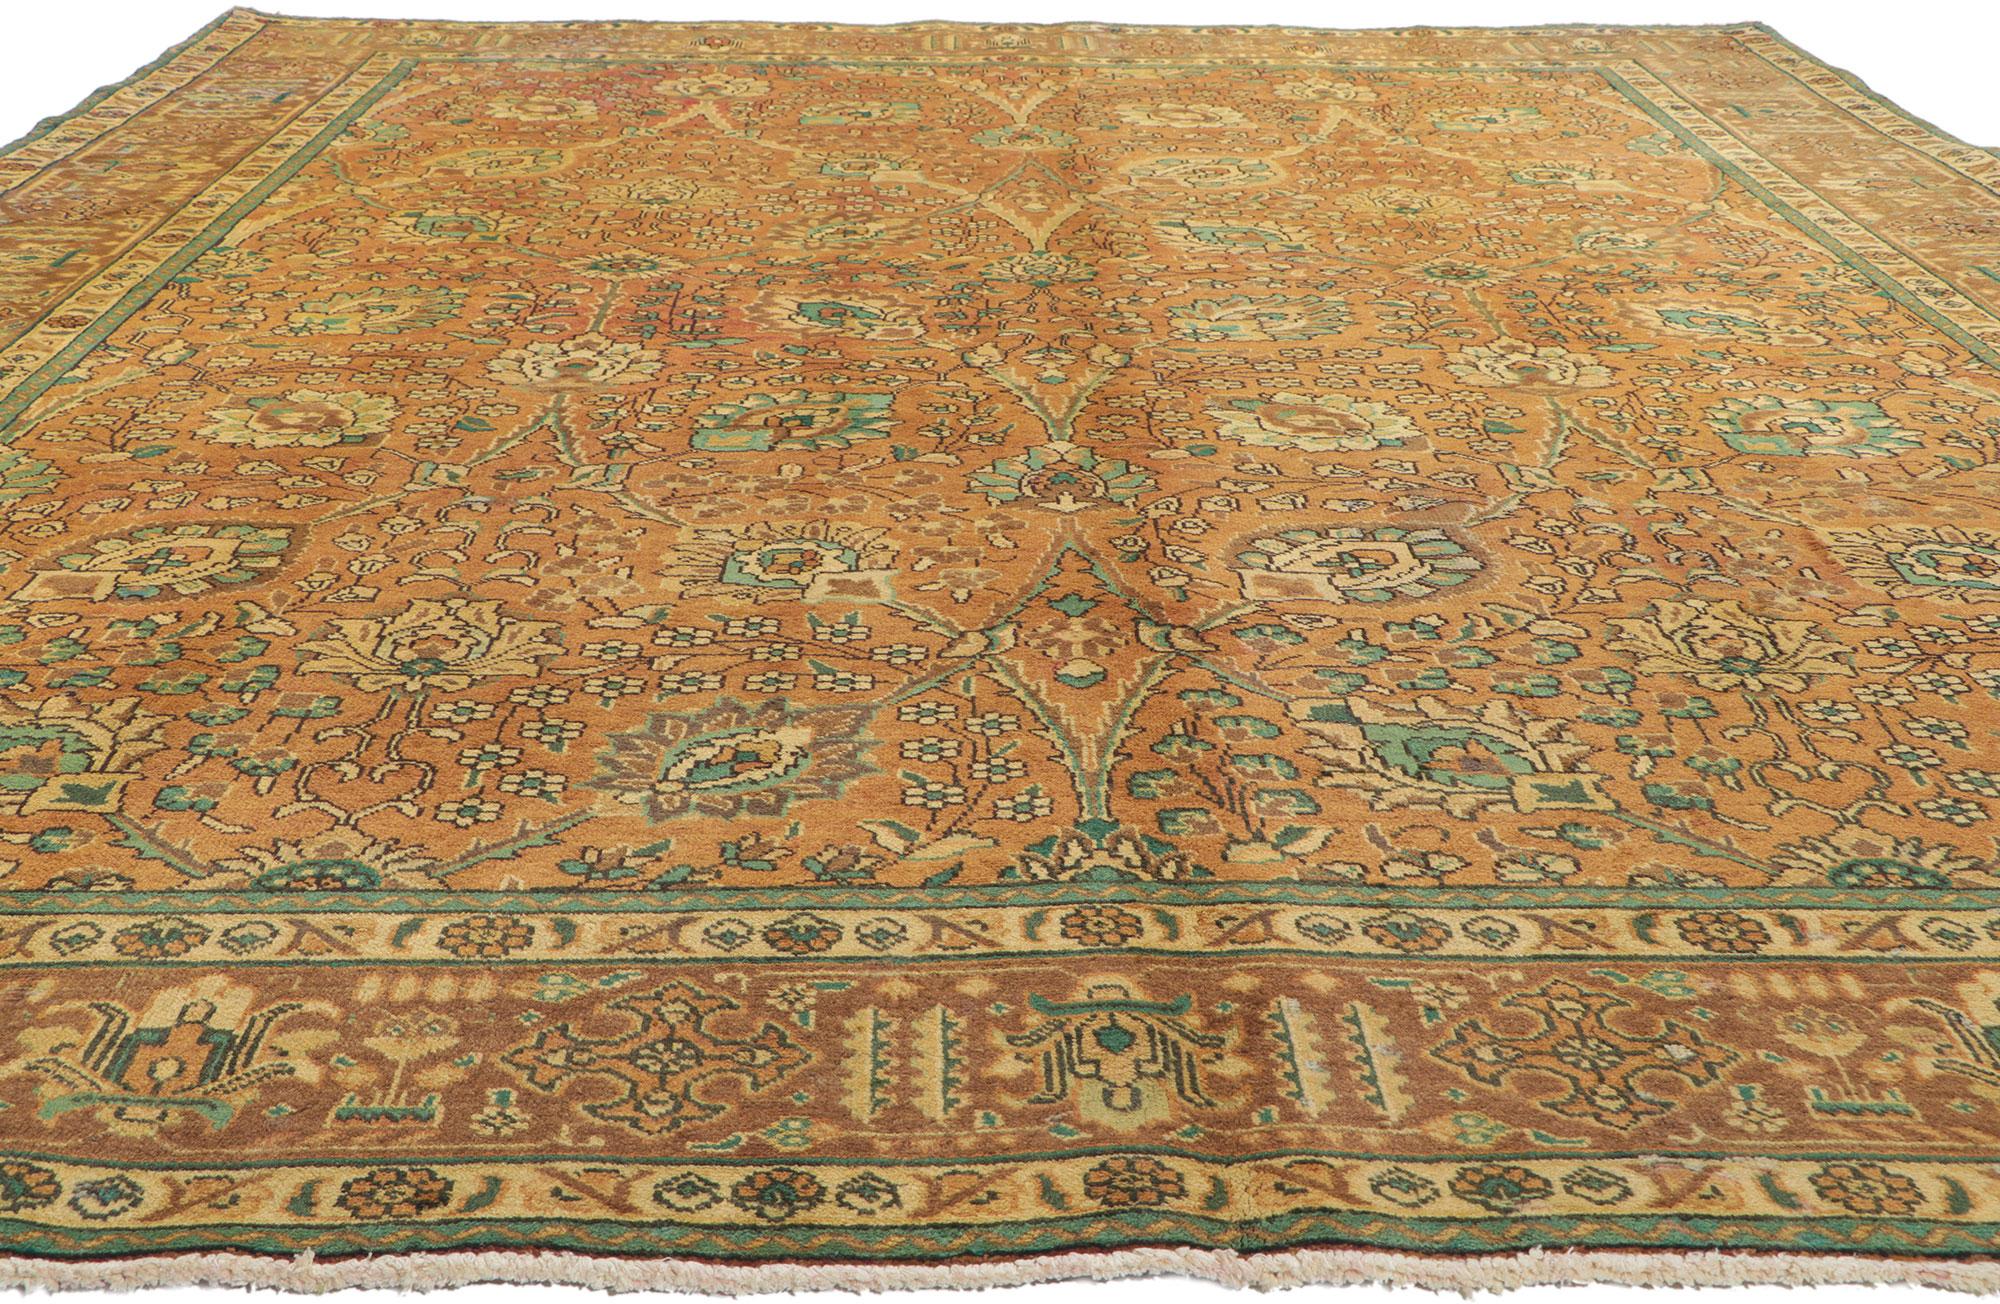 76312 Vintage Persian Tabriz rug, 09'09 x 12'04. Emanating timeless style with incredible detail and texture, this hand knotted wool vintage Persian Tabriz rug is a captivating vision of woven beauty. The traditional design and earthy colorway woven